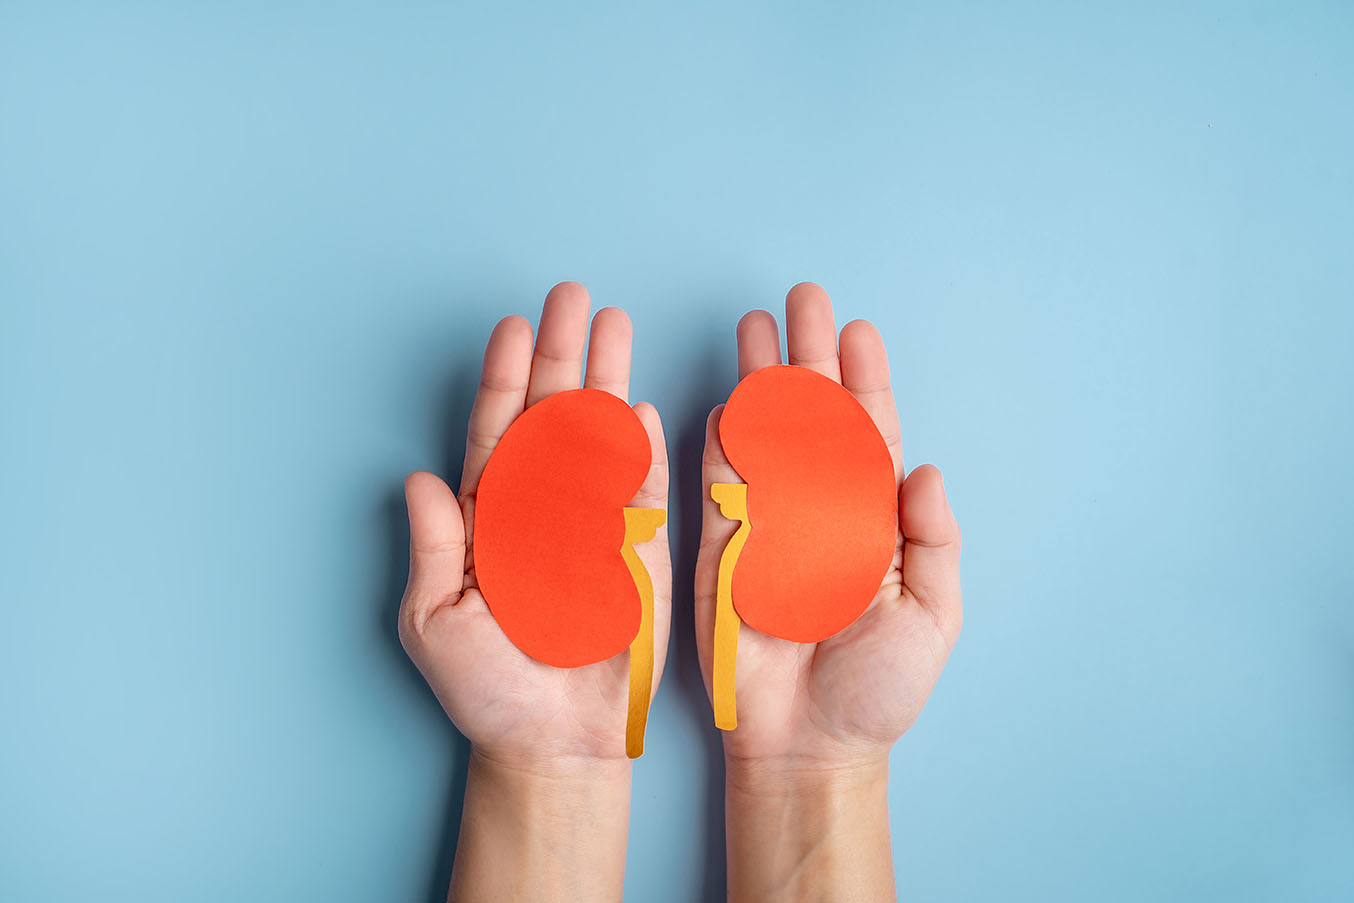 Human hands holding healthy kidney shape made from paper on light blue background.